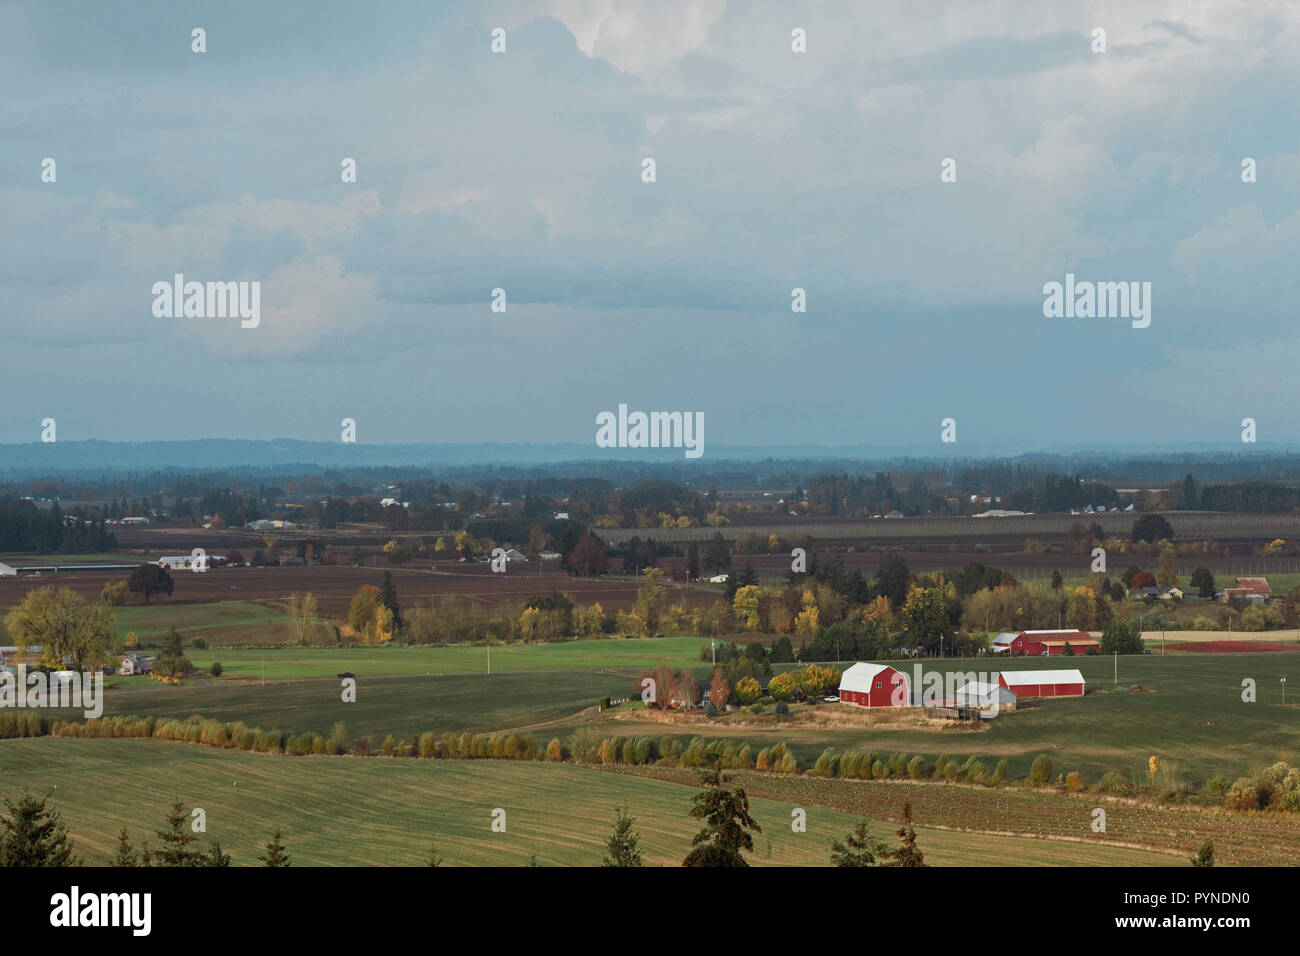 A red barn stands out in this image of of the Mount Angel area of Oregon's Willamette Valley. Stock Photo